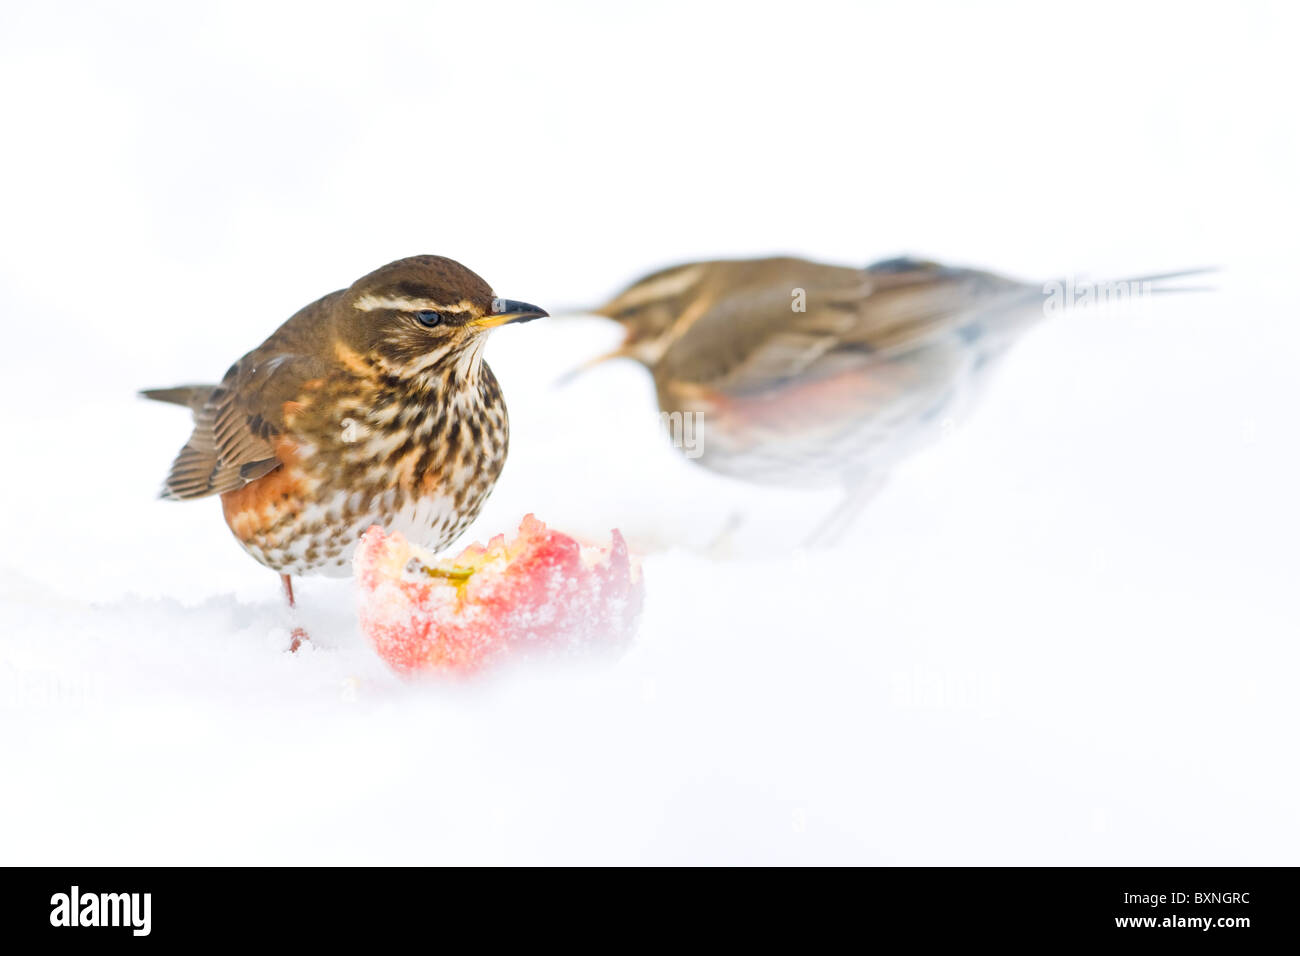 Redwings feeding on apples in snow Stock Photo